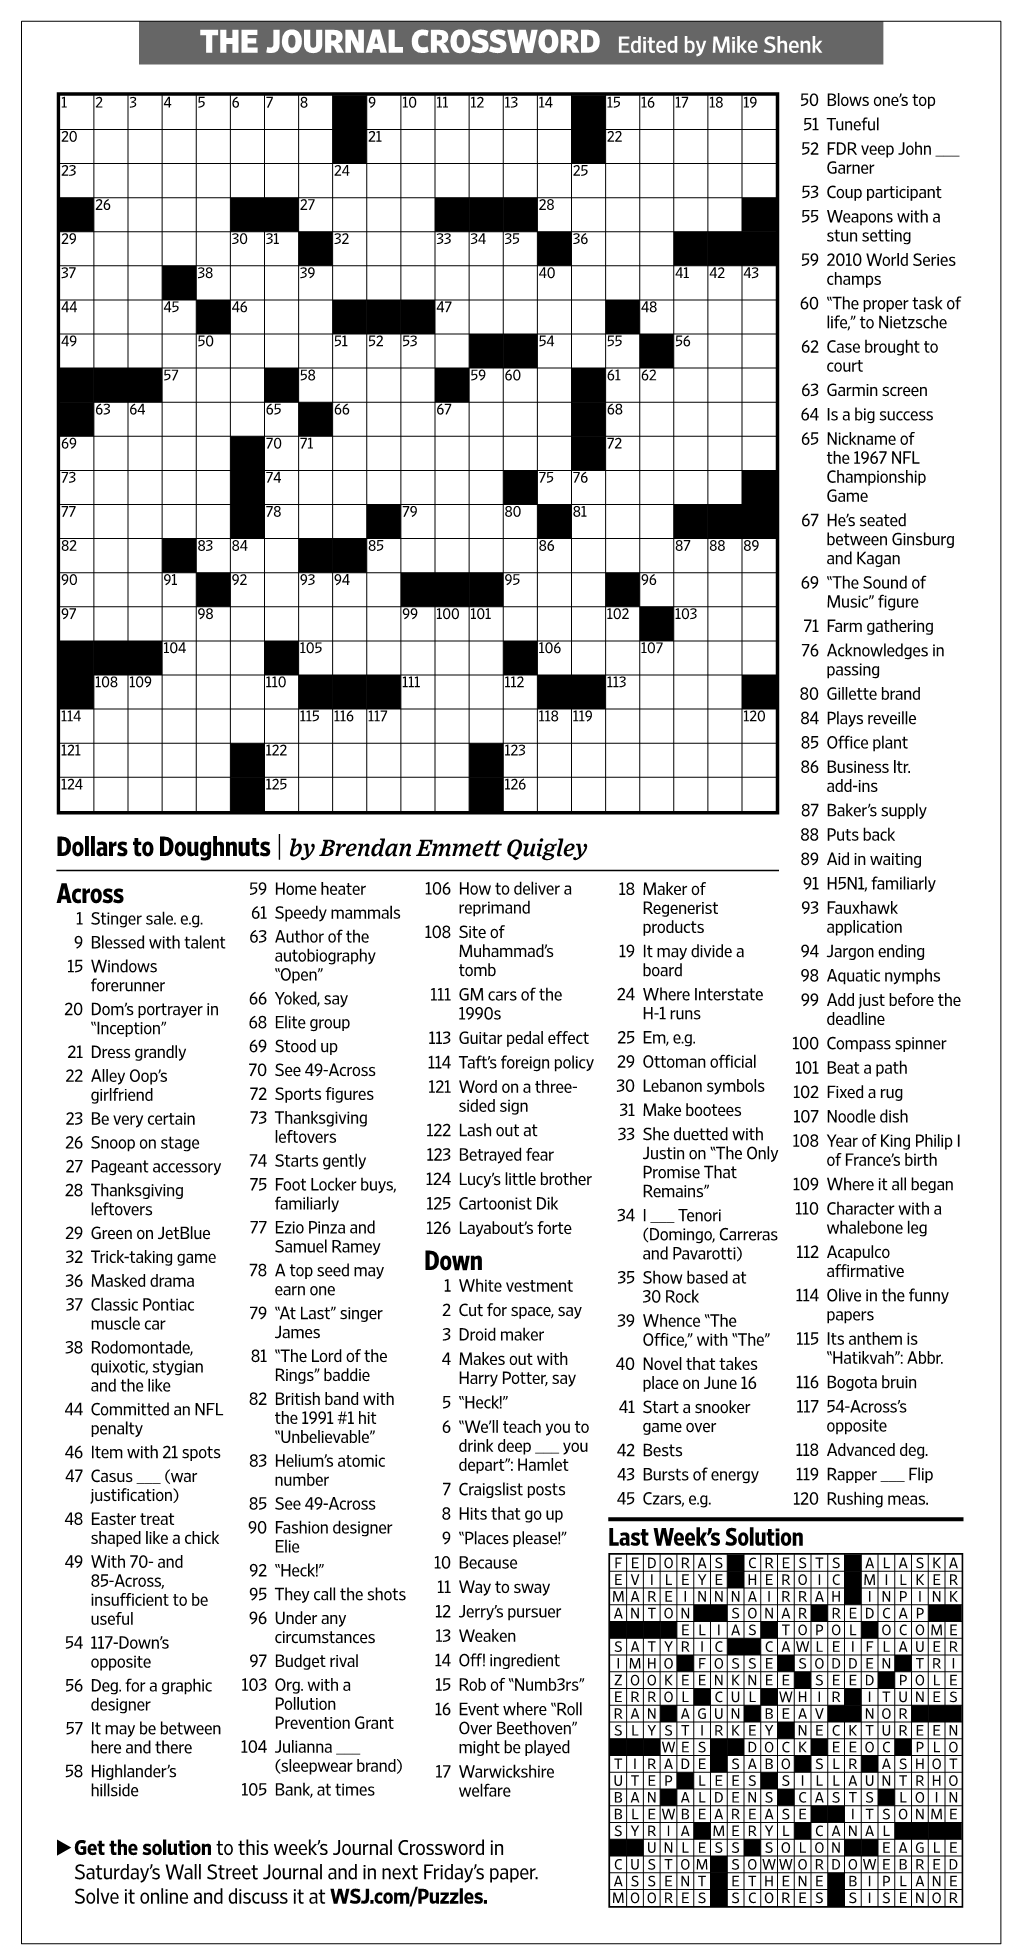 THE JOURNAL CROSSWORD Edited by Mike Shenk